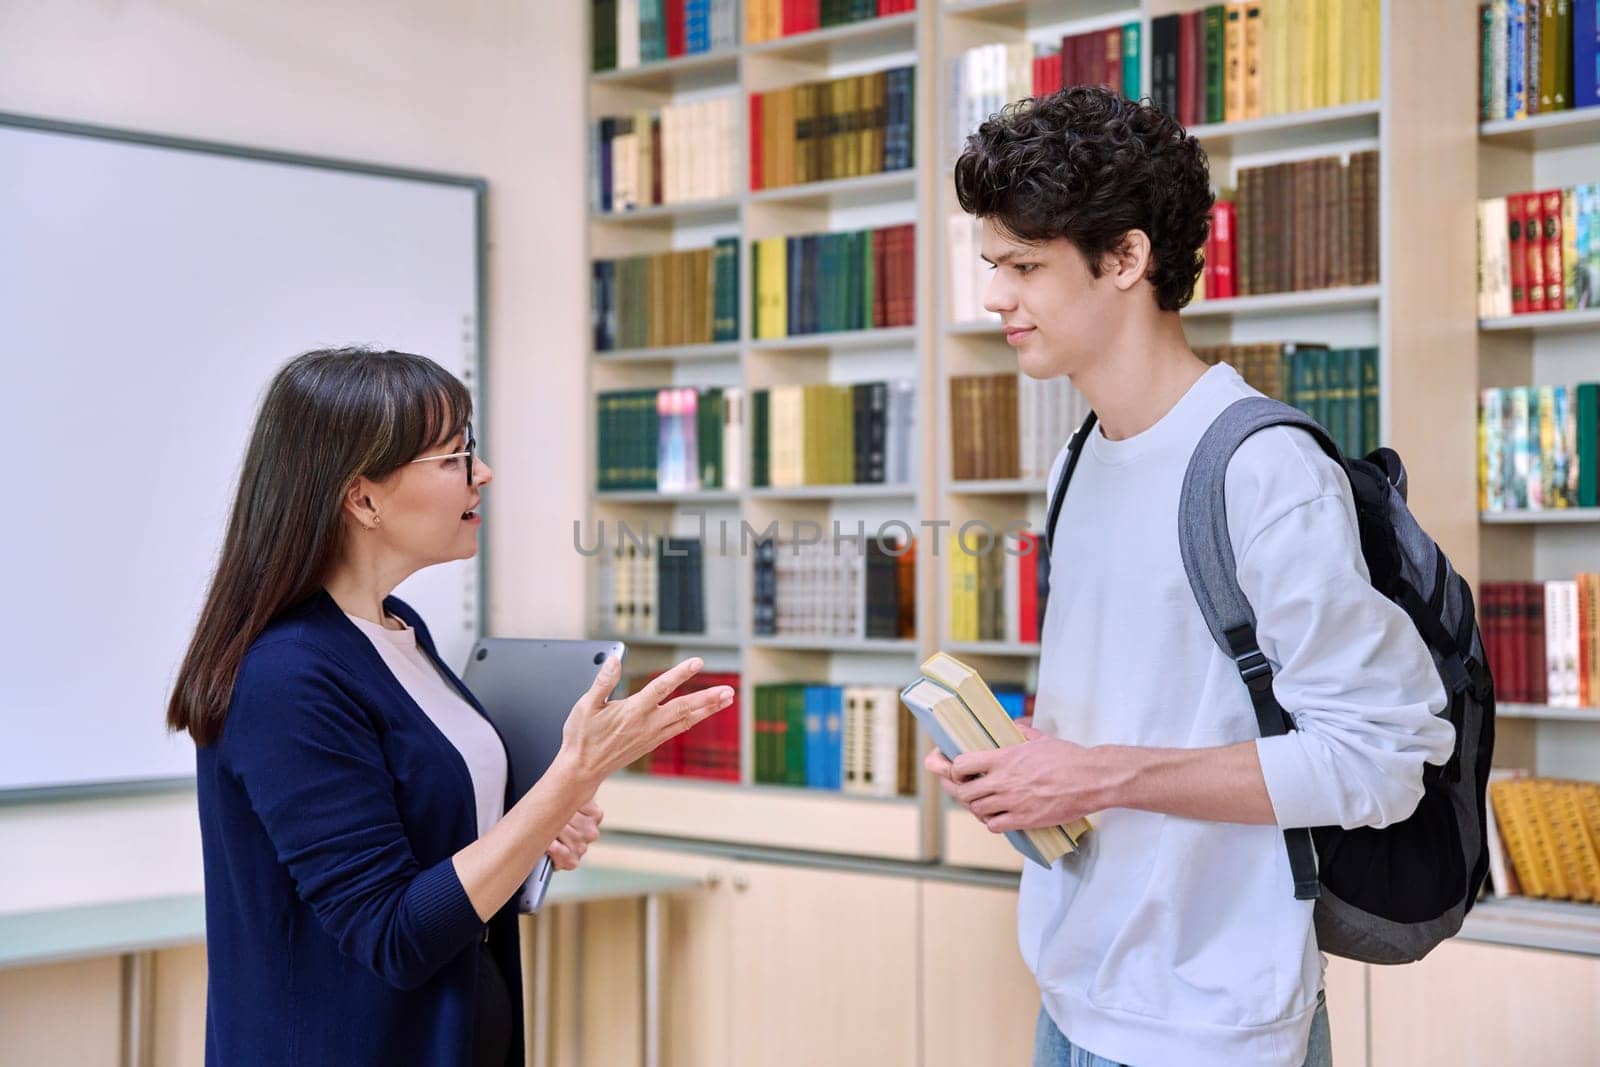 Female teacher talking to guy teenage college student inside educational library office. Education, teaching, youth, lifestyle concept